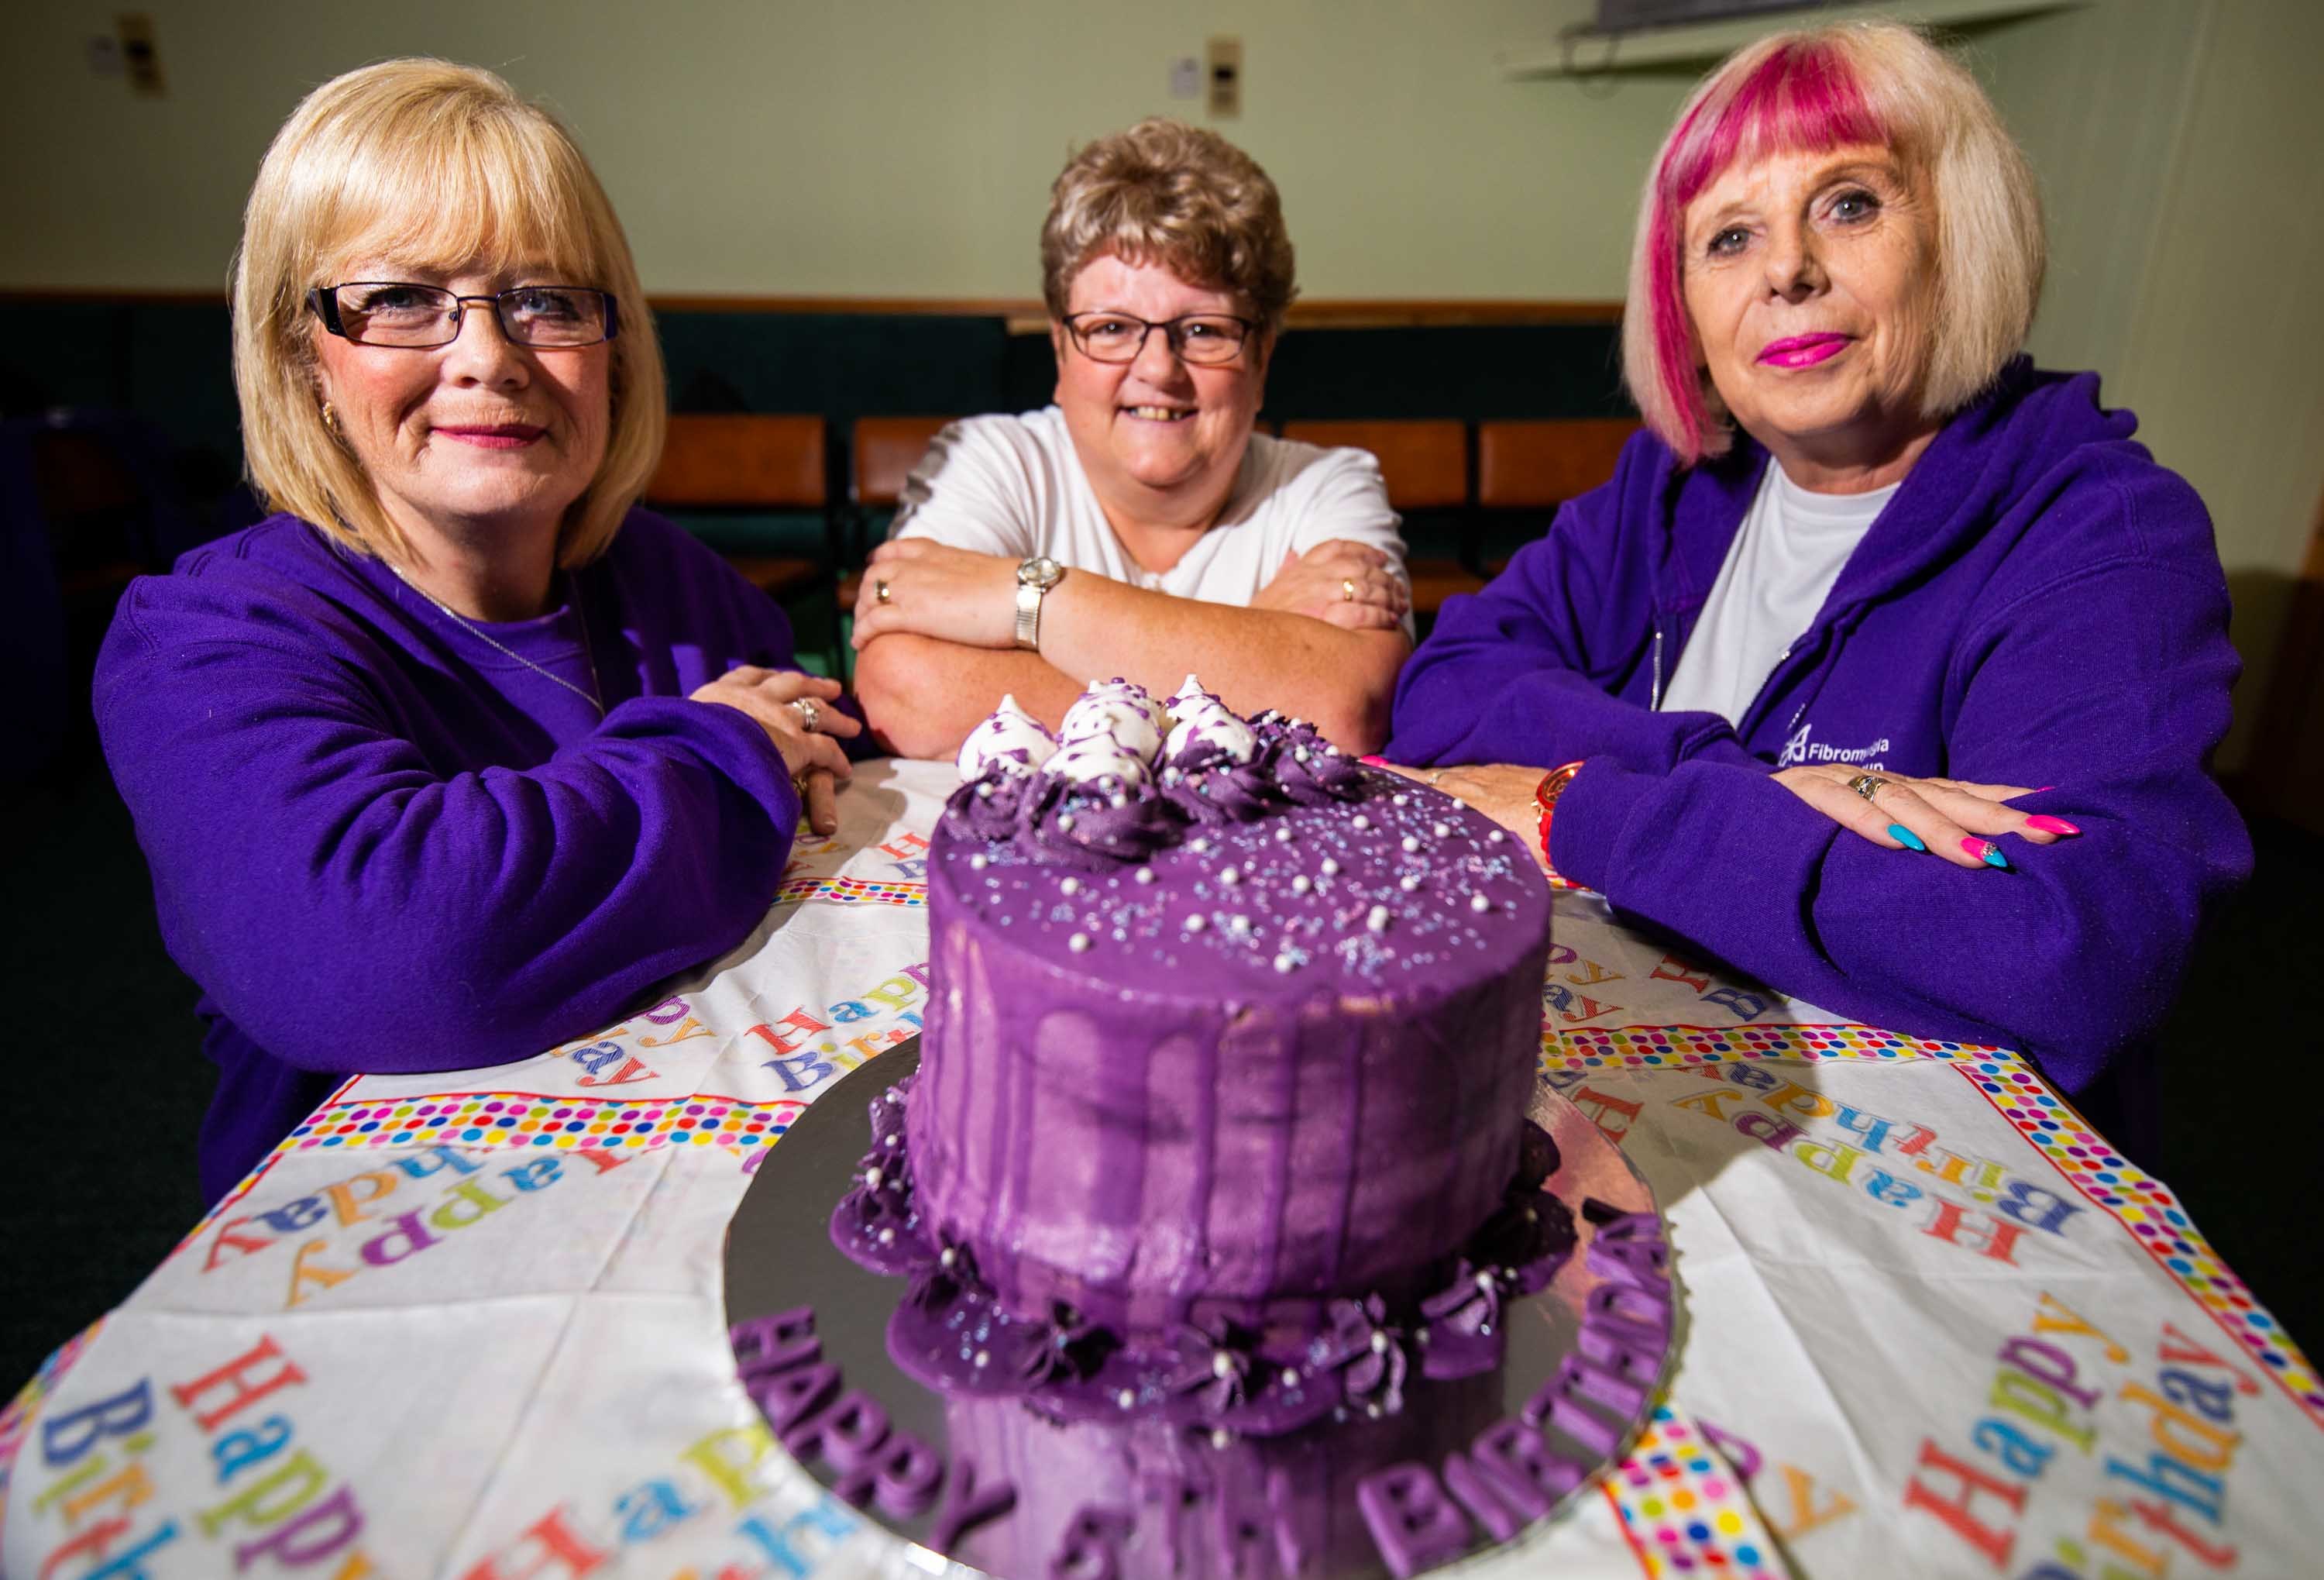 Fibromyalgia support group celebrate is 5th year anniversary, they are at Lossiemouth football club social club.

In photo at the front from the left Karen Mcsheffrey, Susan Sutherland and Fiona Campbell.  They are the original founders of the group.



Photo by
Michael Traill
9 South Road
Rhynie
Huntly
AB54 4GA

Contact numbers
Mob07739 38 4792